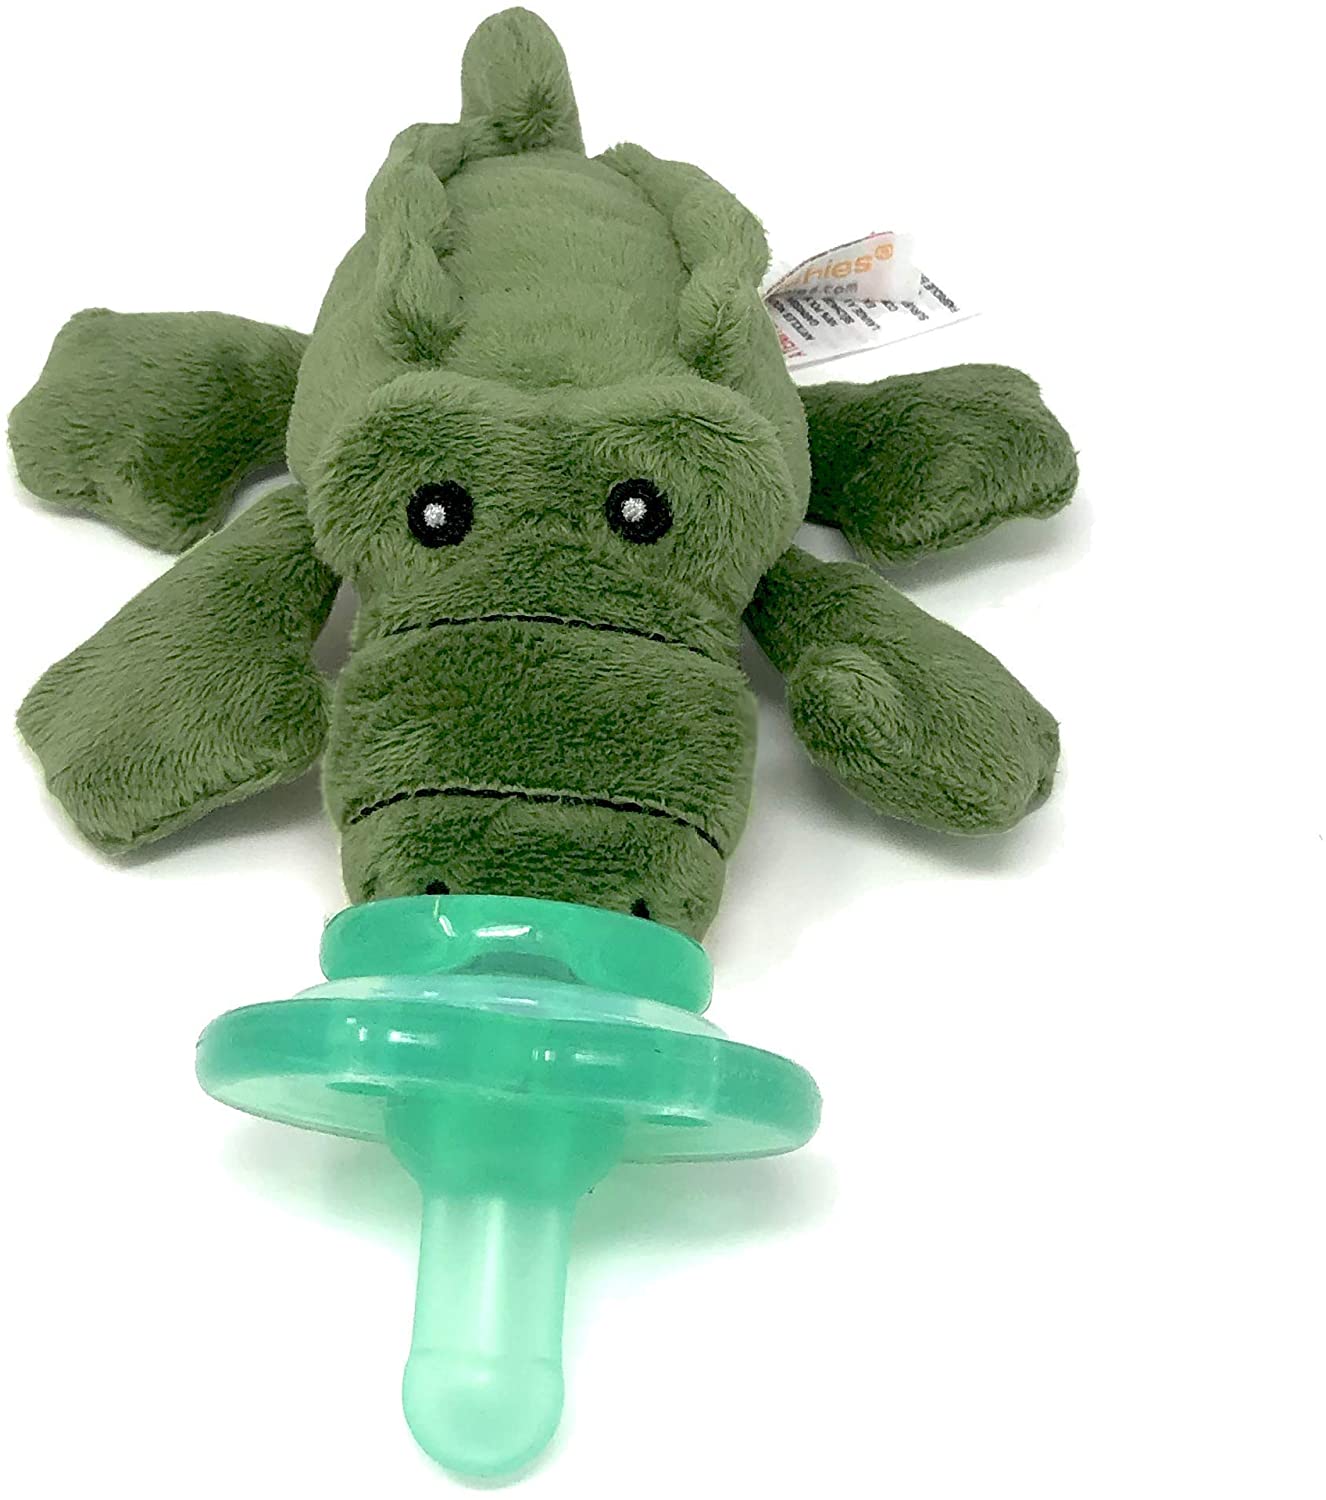 Nookums Paci-Plushies Buddies - Alligator Pacifier Holder - Plush Toy Includes Detachable Pacifier - Little Kooma